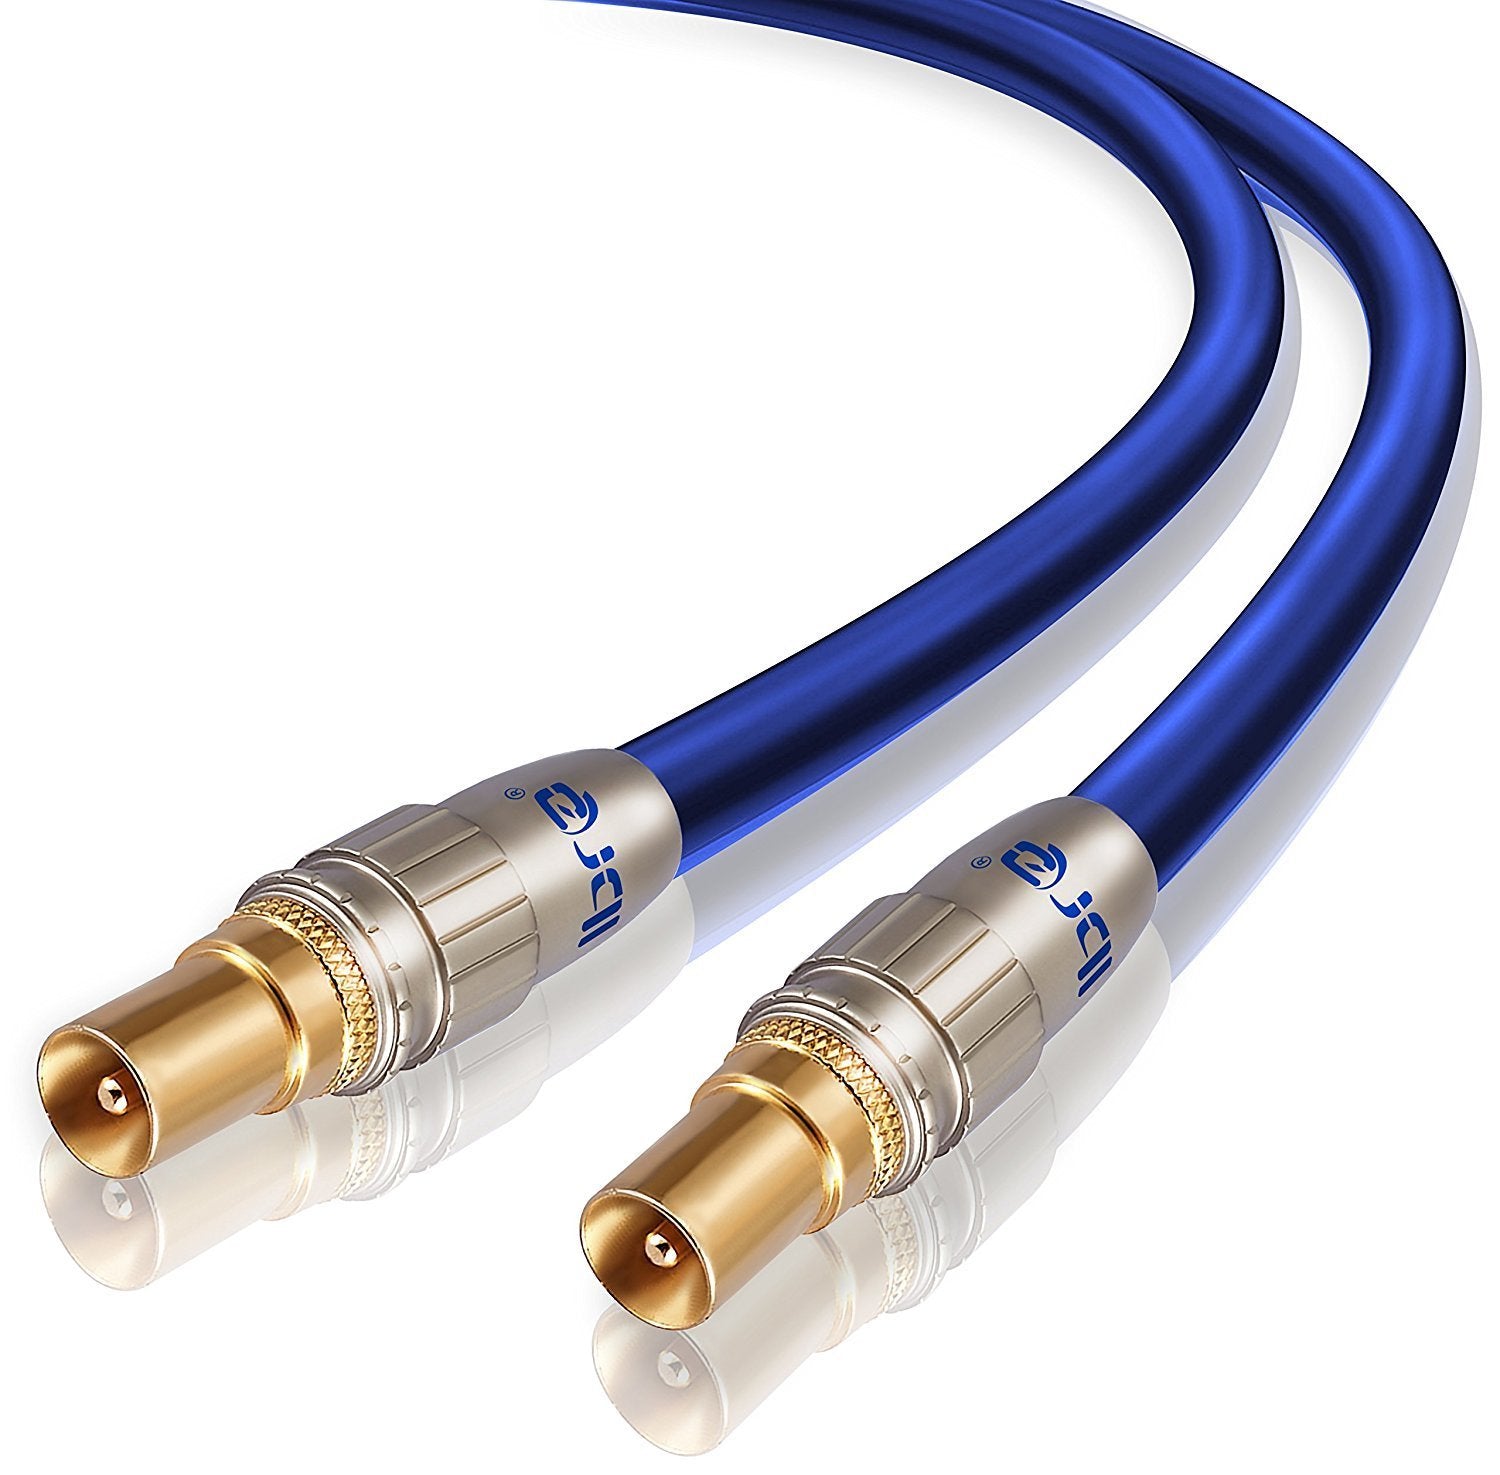 3M HDTV Antenna Cable | TV Aerial Cable | Premium Freeview Coaxial Cable | Connectors: Coax Male to Coax Male | For UHF / RF TVs, VCRs, DVD players, DVRs, cable boxes and satellite | IBRA Blue Gold